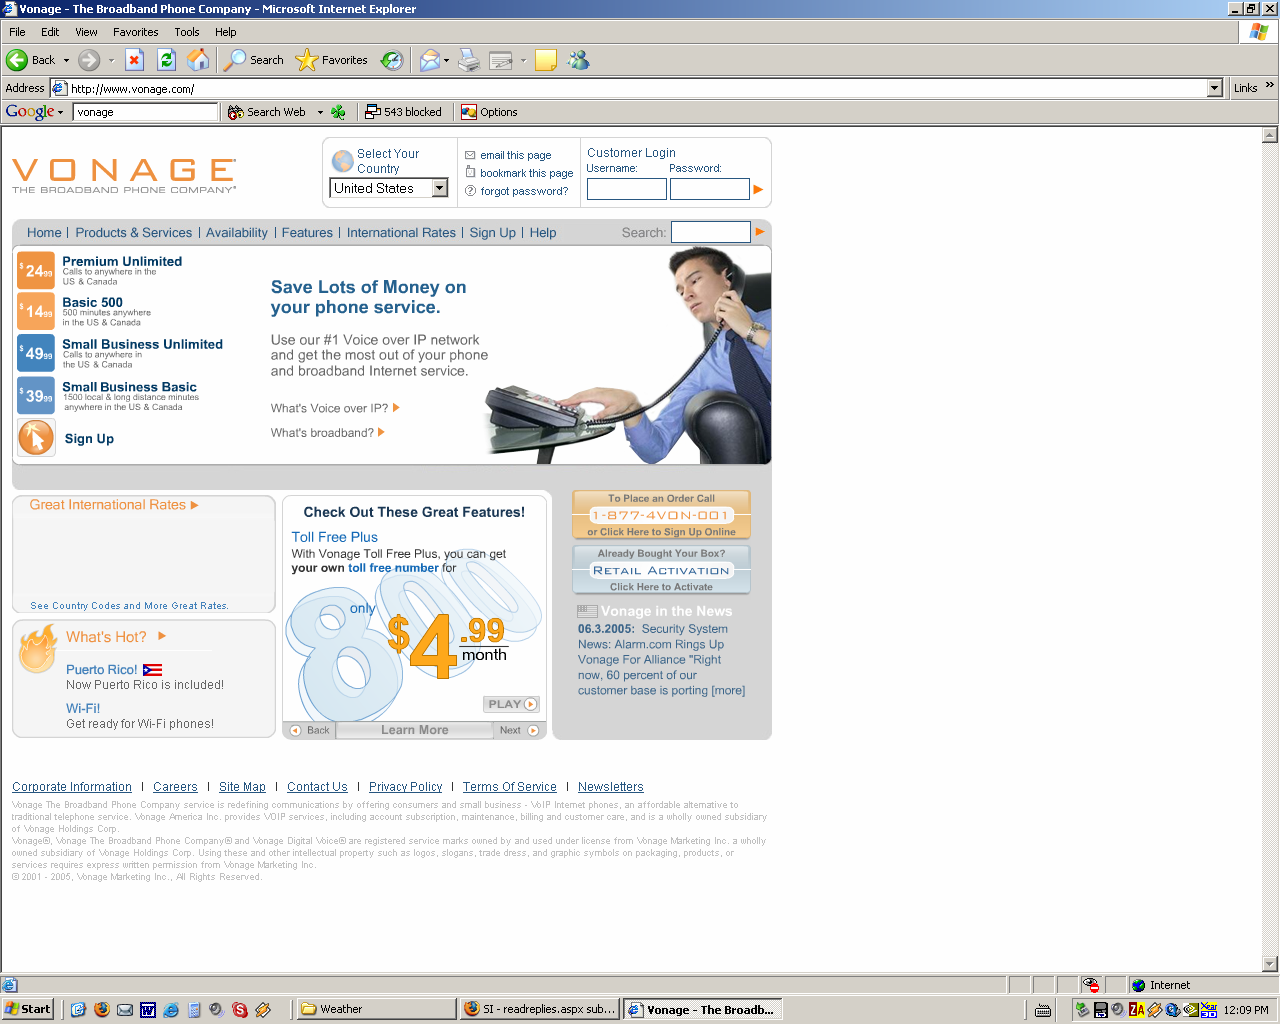 Screen shot of the Vonage home page.